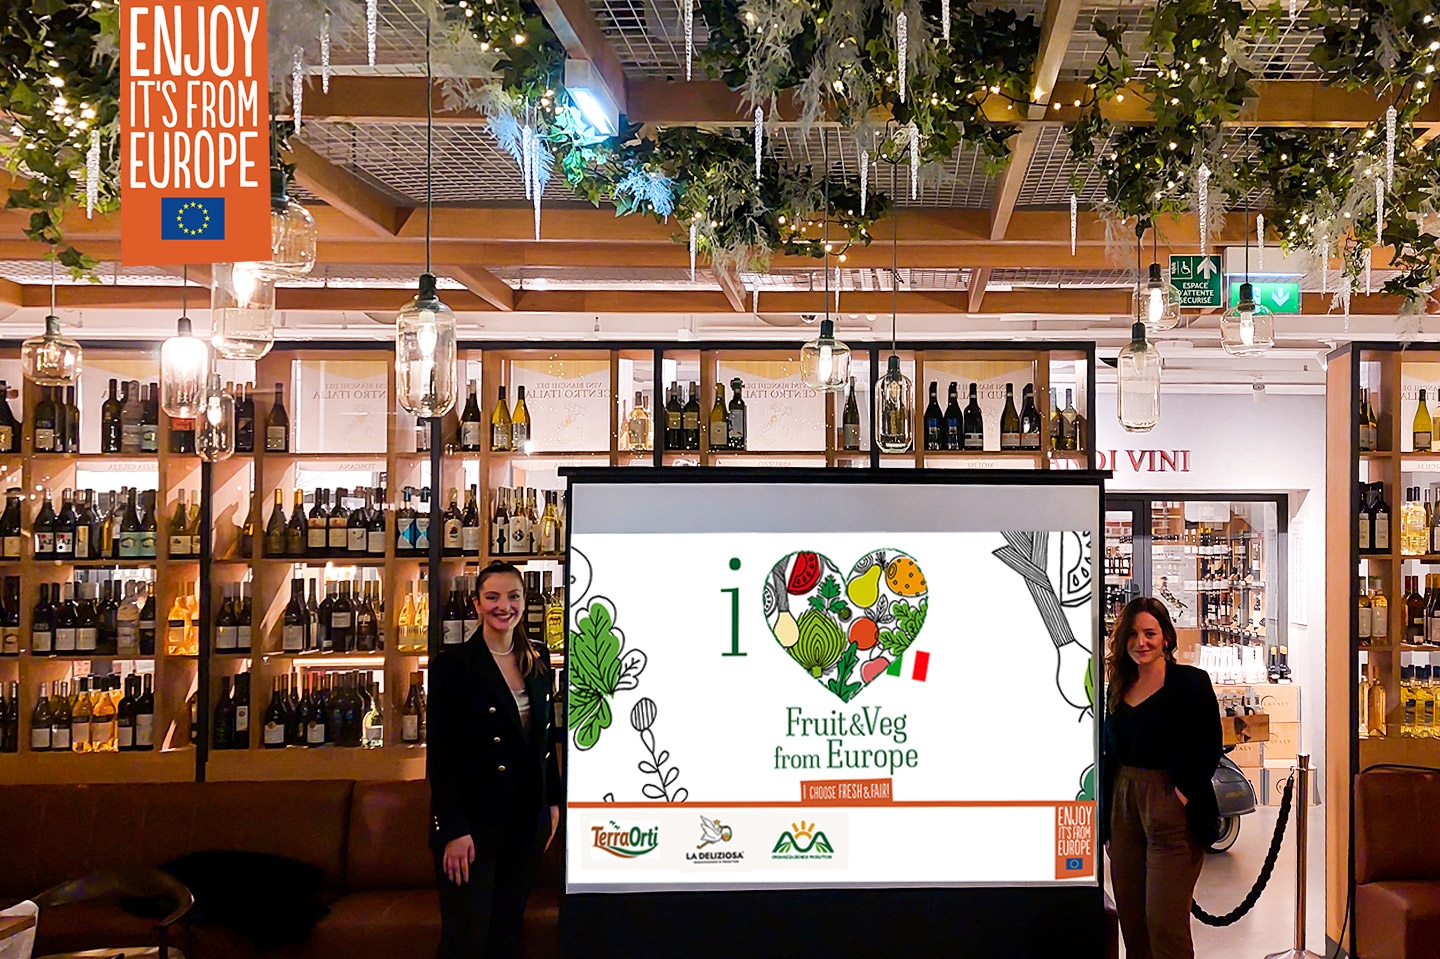 Evento stampa a Eataly Paris - I Love Fruit&Veg from Europe